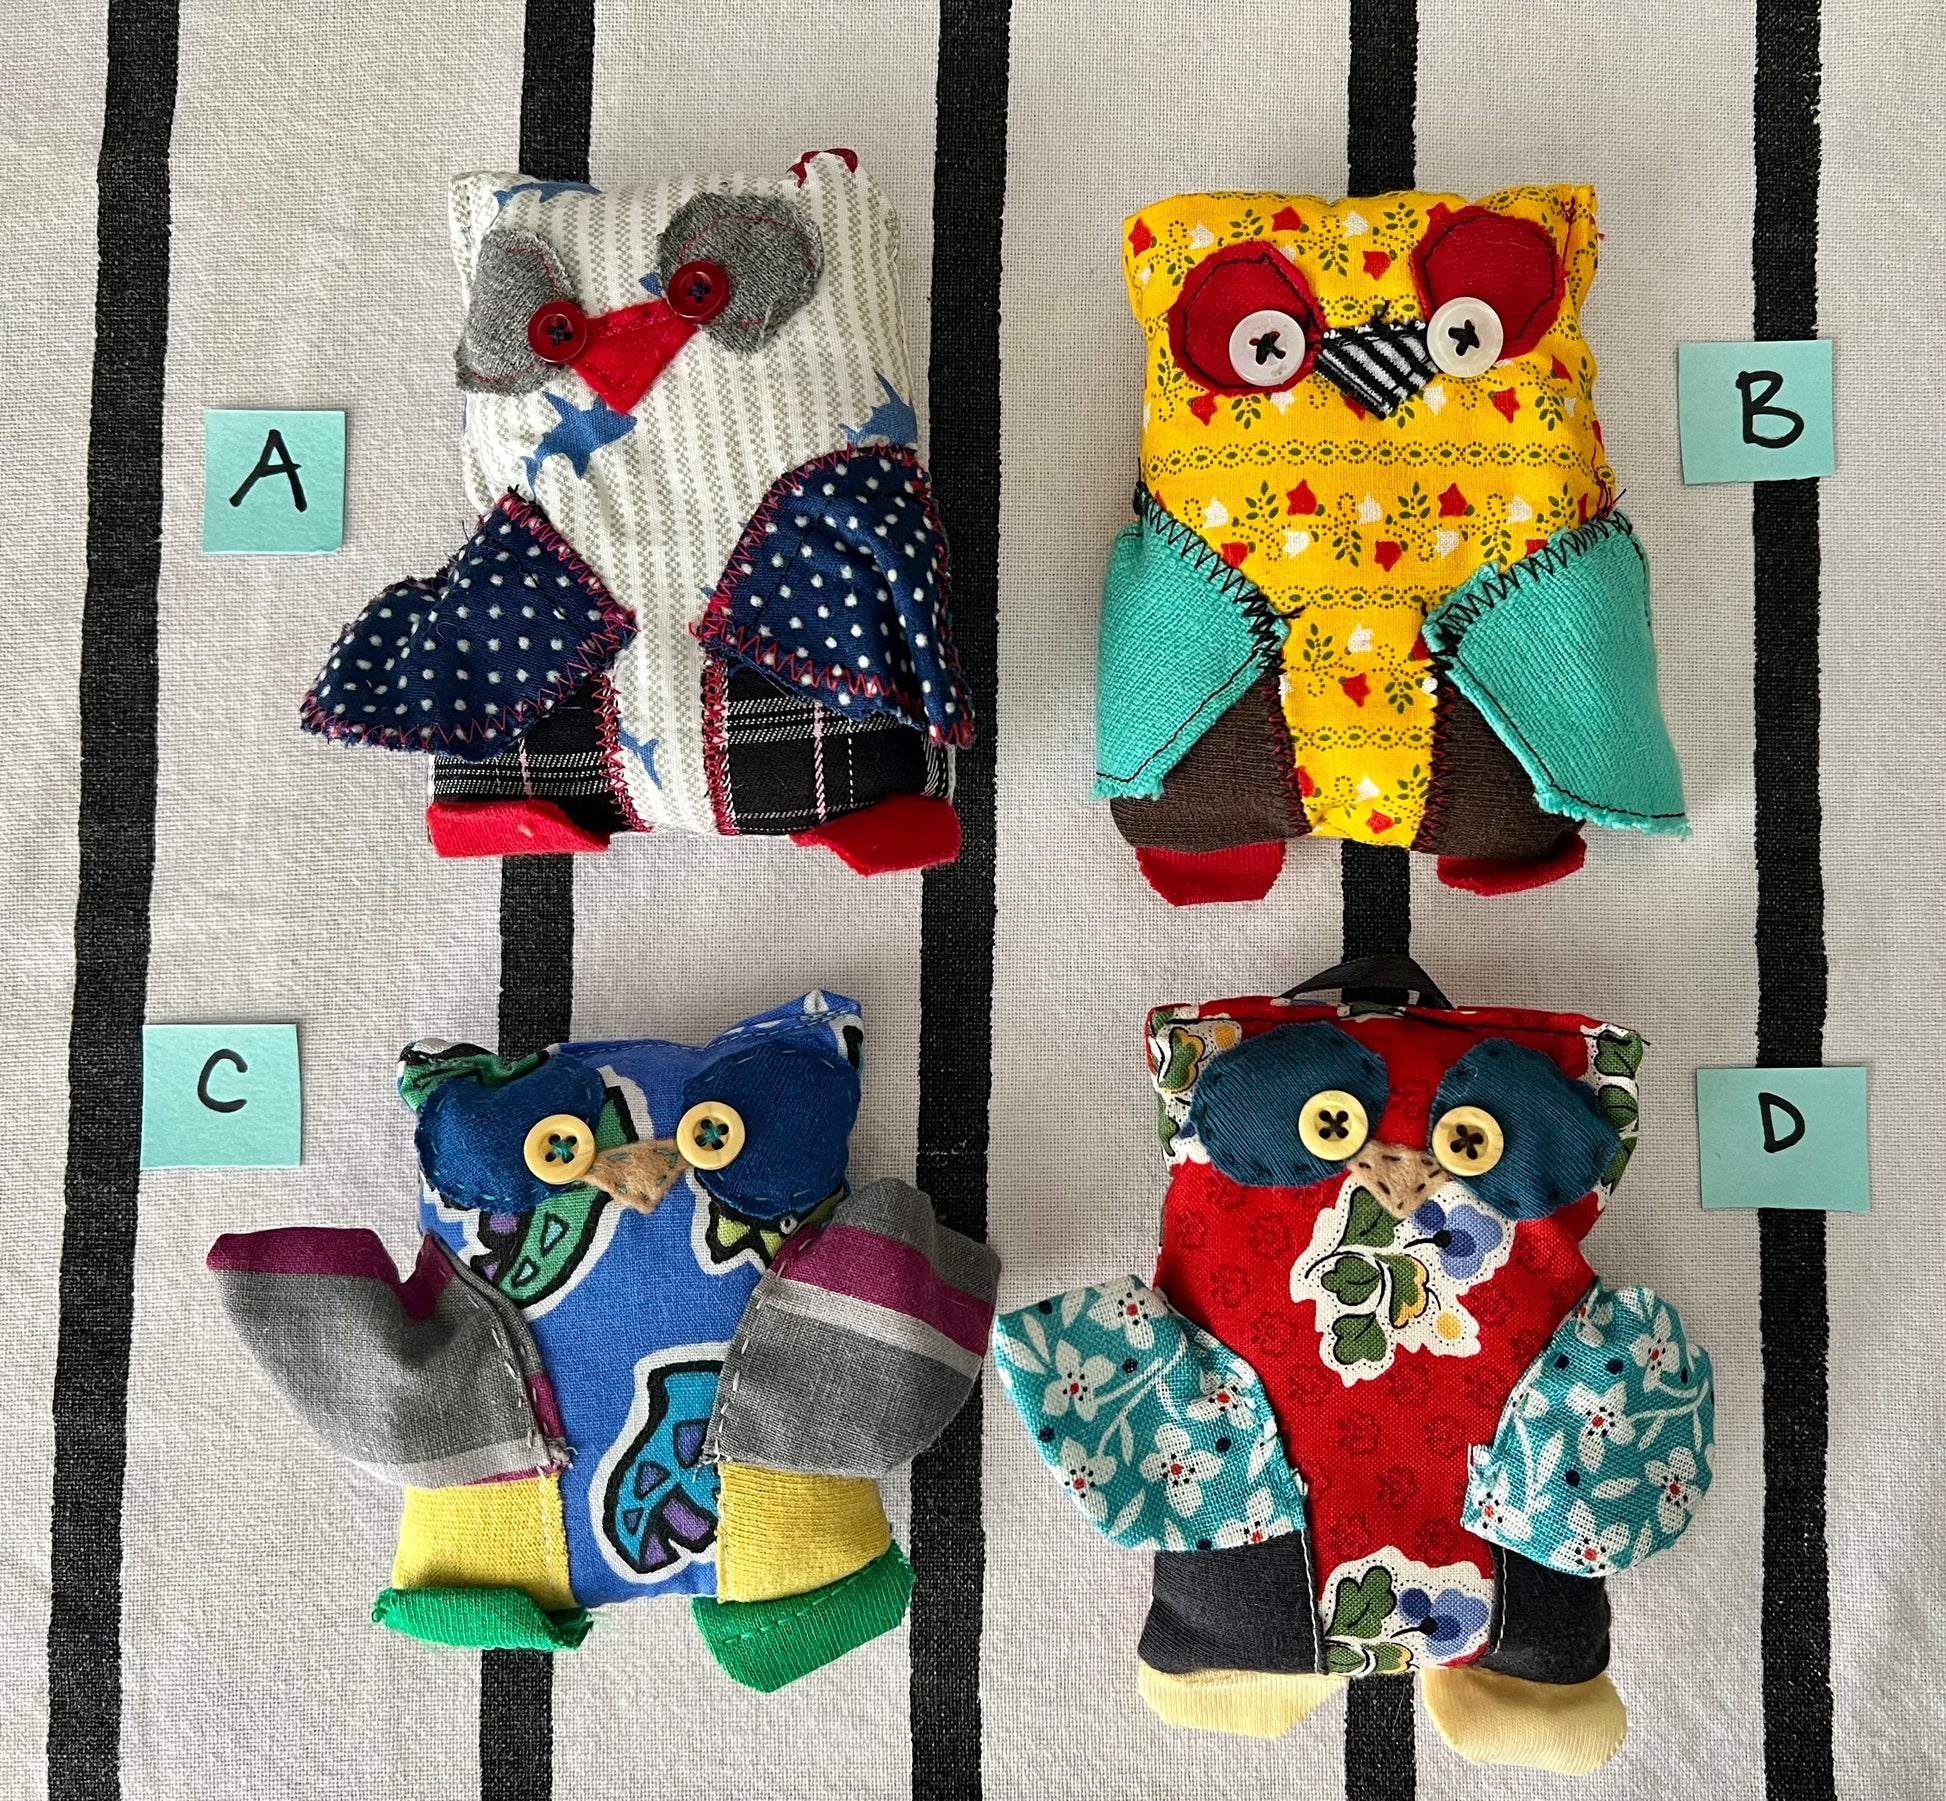 front view of mini animals with letters A B C D next to each one.